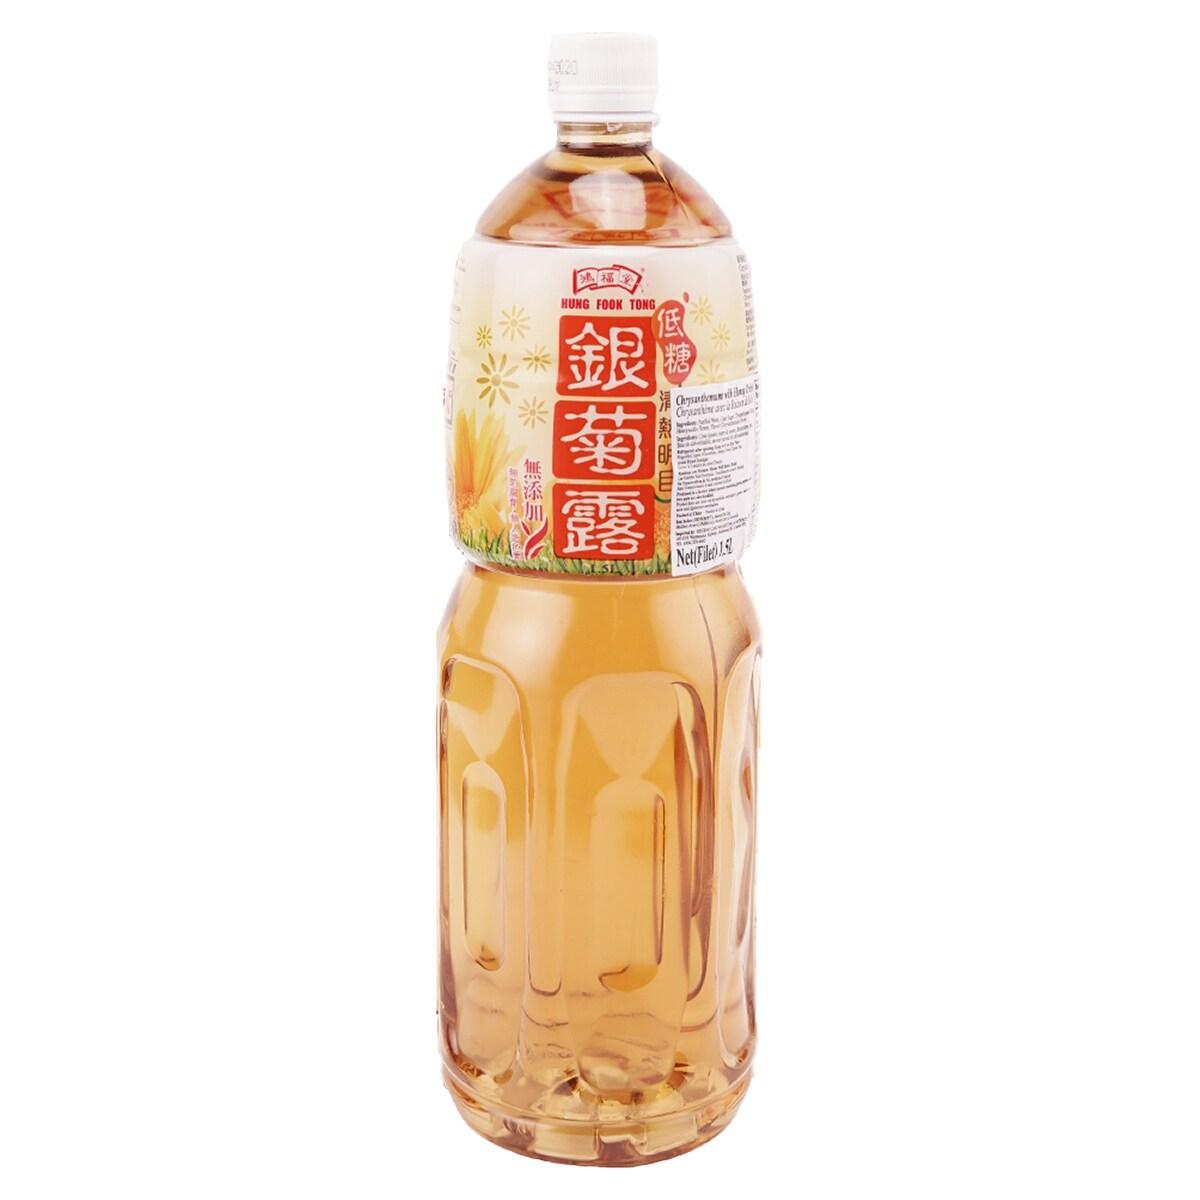 hung-fook-tong-chrysanthemum-with-honey-drink-1-5l